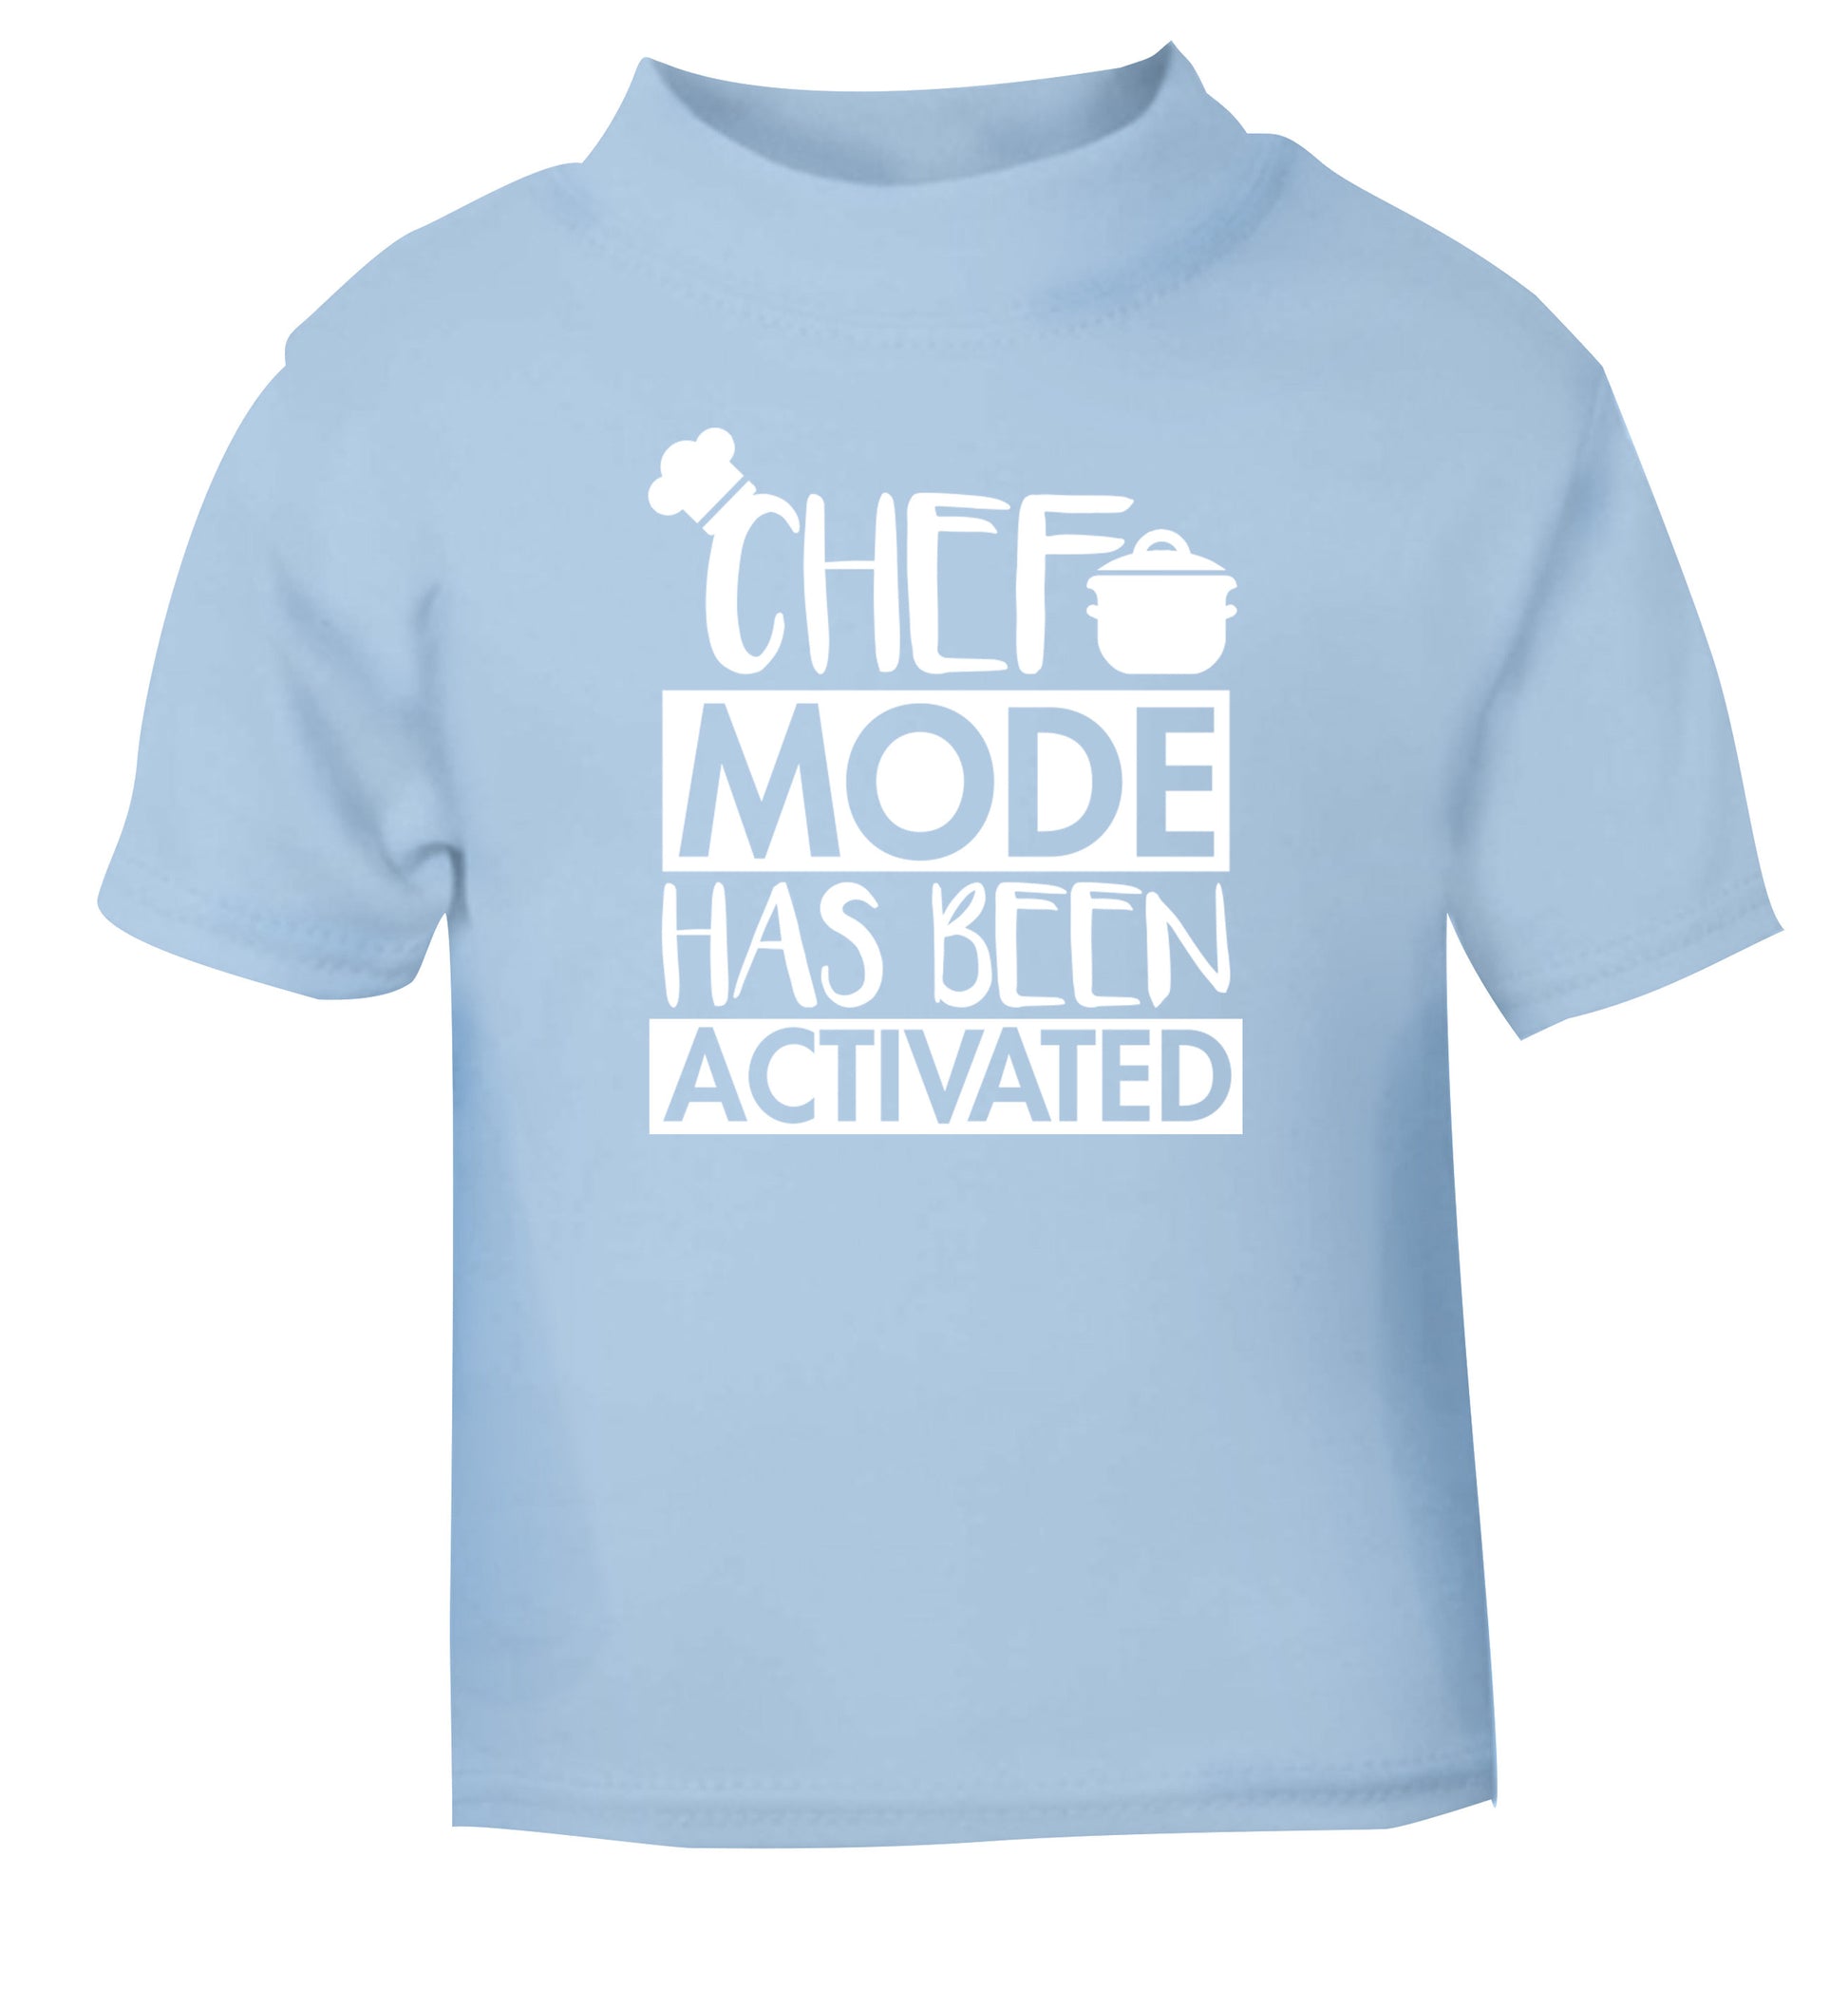 Chef mode has been activated light blue Baby Toddler Tshirt 2 Years